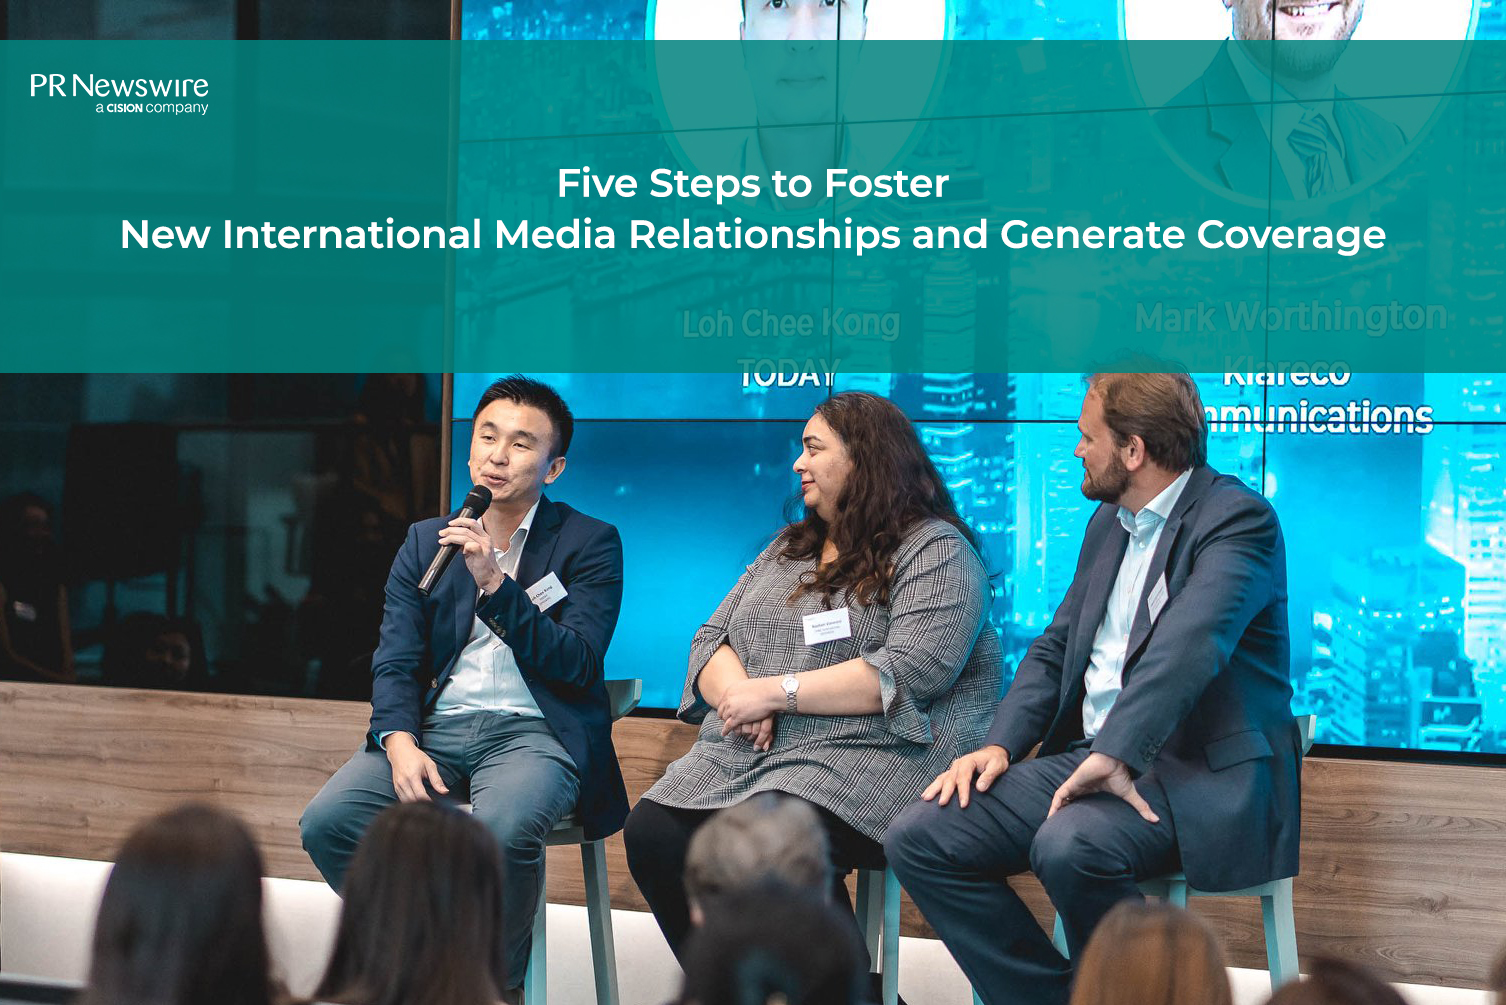 Five Steps to Foster New International Media Relationships and Generate Coverage